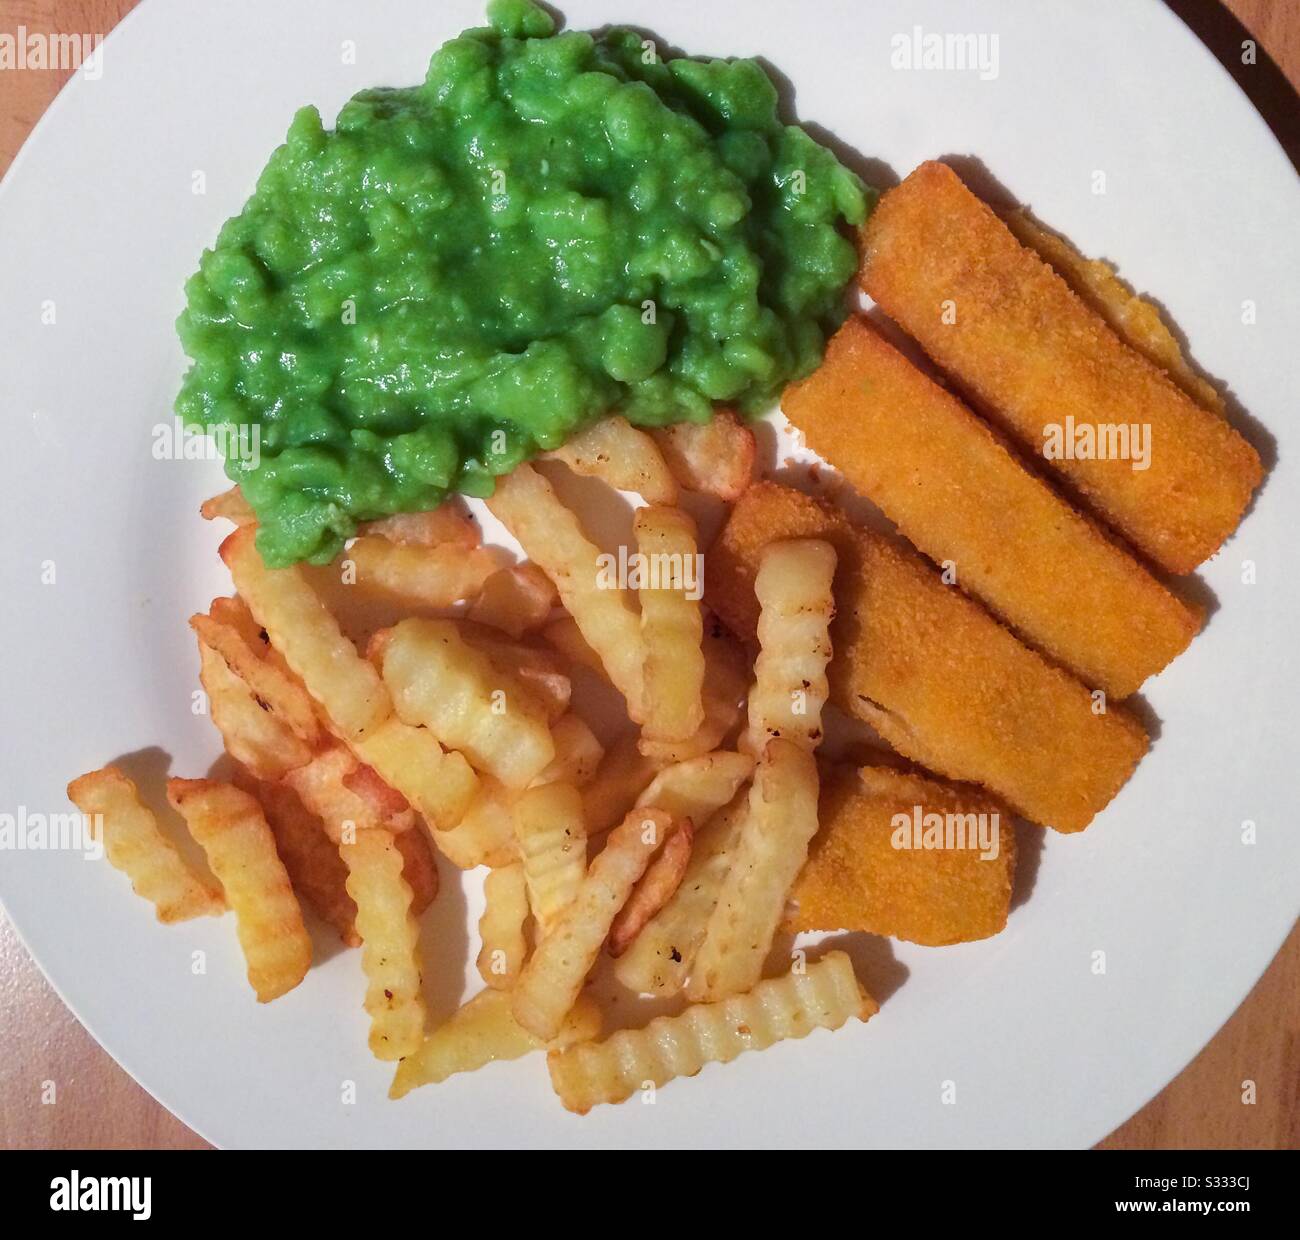 A complete meal of fish fingers, mushy peas and chips, on a white plate, viewed from above. Stock Photo